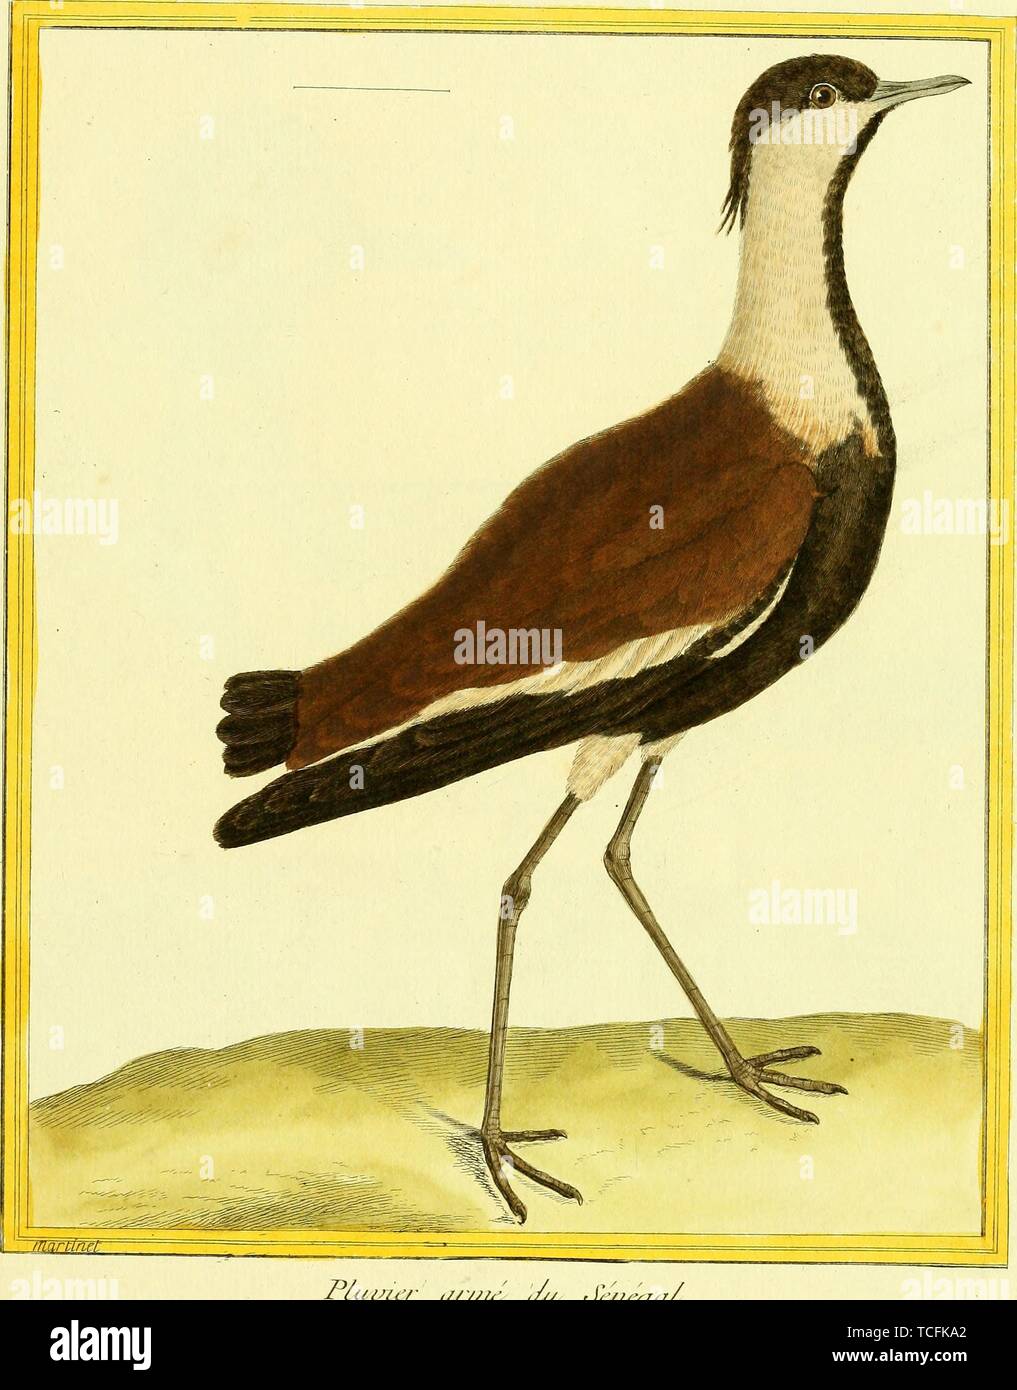 Engraved drawing of the Senegal Lapwing (Vanellus lugubris), from the book 'Planches enluminees Dhistoire naturelle' by Francois Nicolas, Louis Jean Marie Daubenton, and Edme-Louis Daubenton, 1765. Courtesy Internet Archive. () Stock Photo